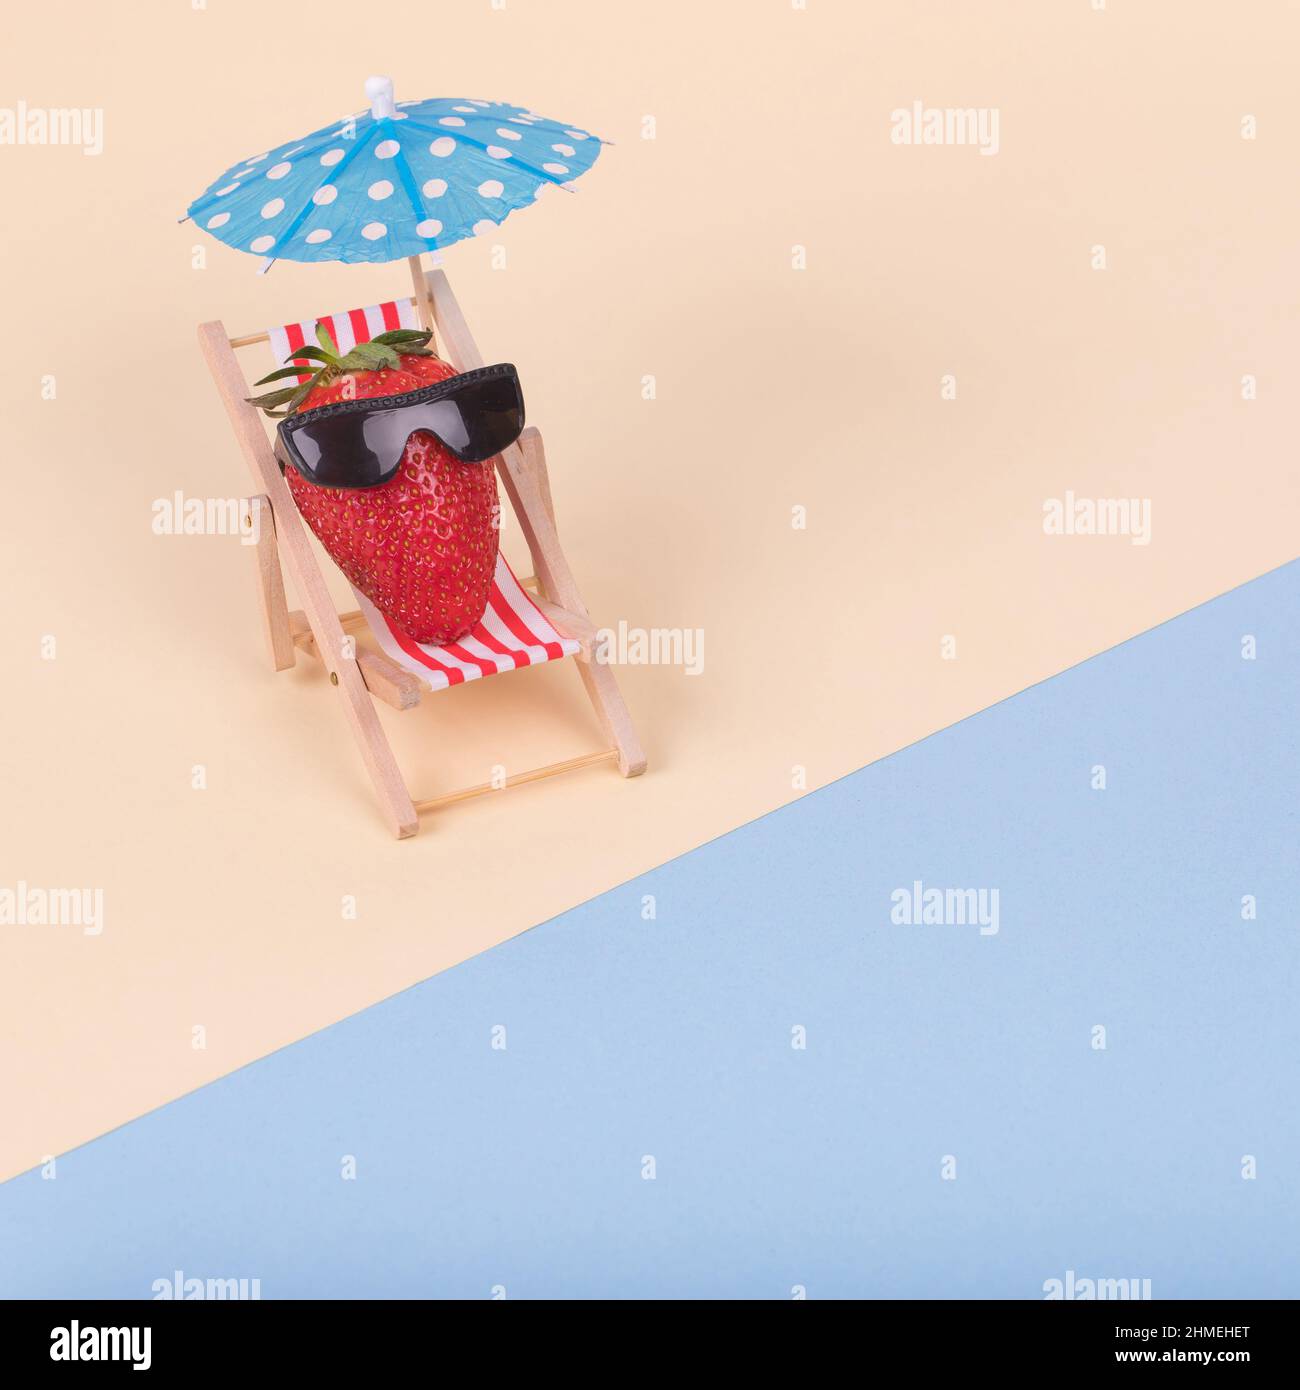 Creative fun idea made of deck chair, sun umbrella and strawberry with sunglasses on a beach. Minimal  summer vacation concept. Stock Photo